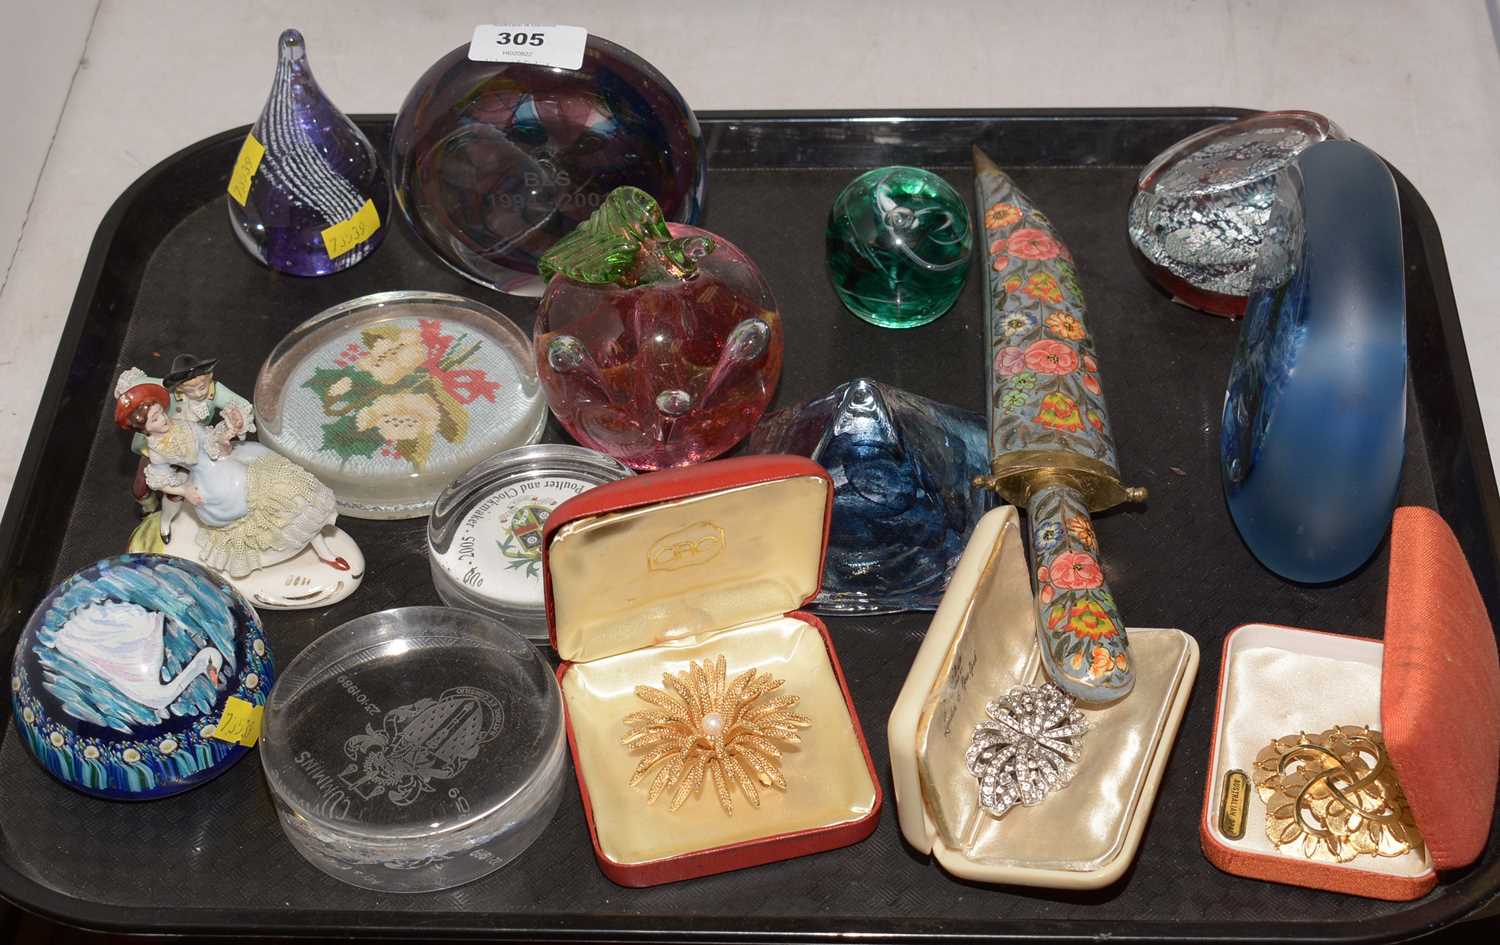 A selection of glass paperweights and other decorative items.